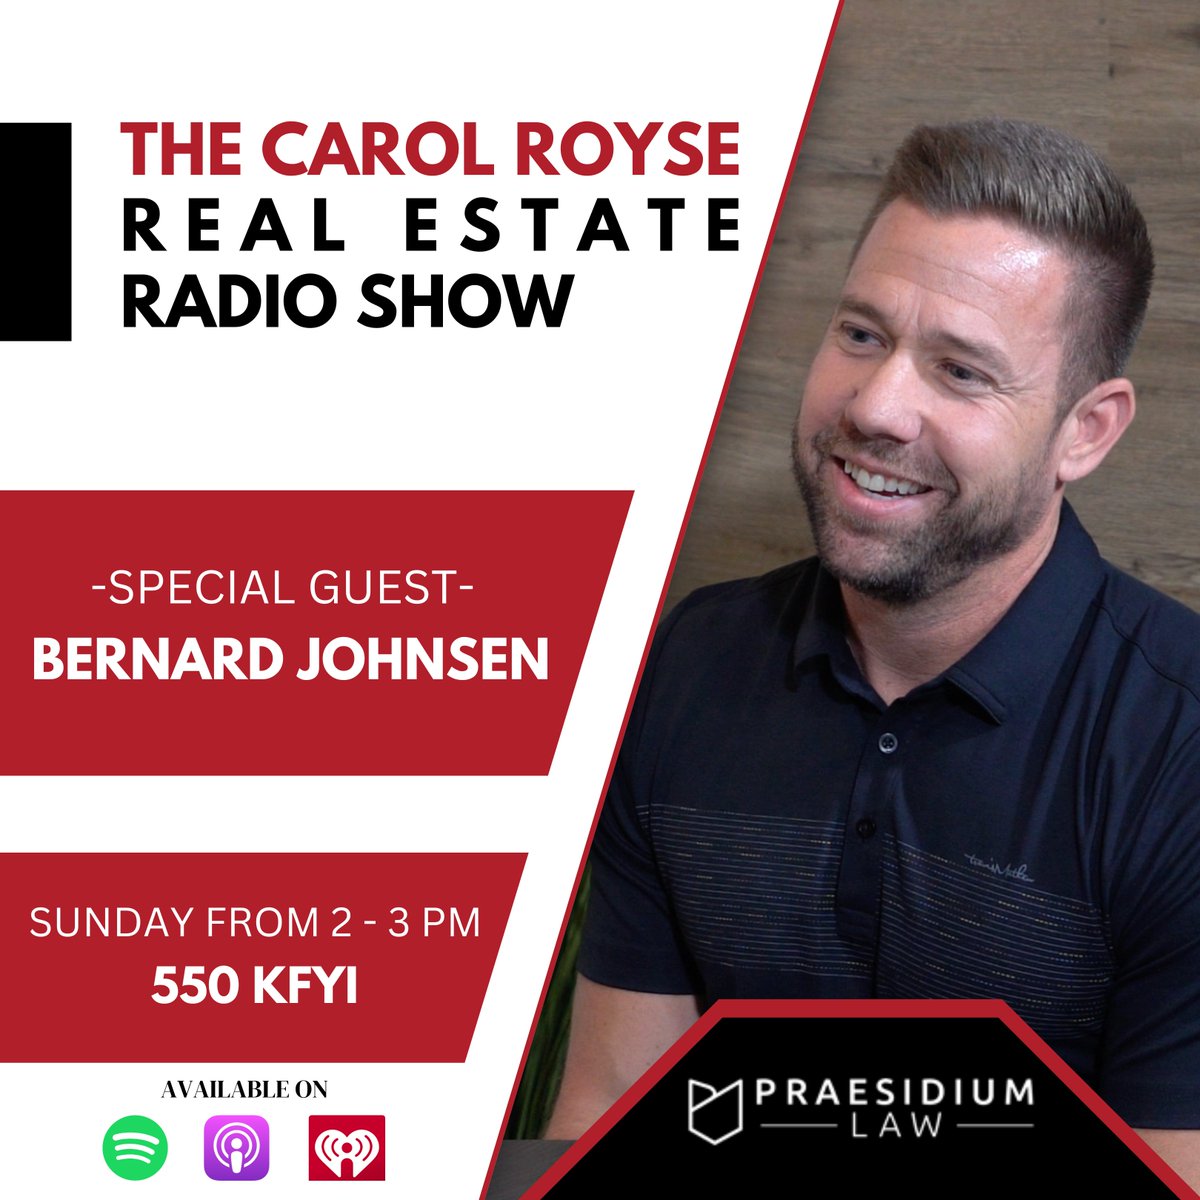 Do you have questions about Probate, Trusts, & Estate Planning? Then don't miss Bernard Johnsen of Praesidium Lawon the Carol Royse Real Estate Radio Show this Sunday from 2PM - 3PM. #CarolRoyse #RadioShow #Podcast #PraesidiumLaw #Law #Probate #Trust #EstatePlanning #AZRealEstate